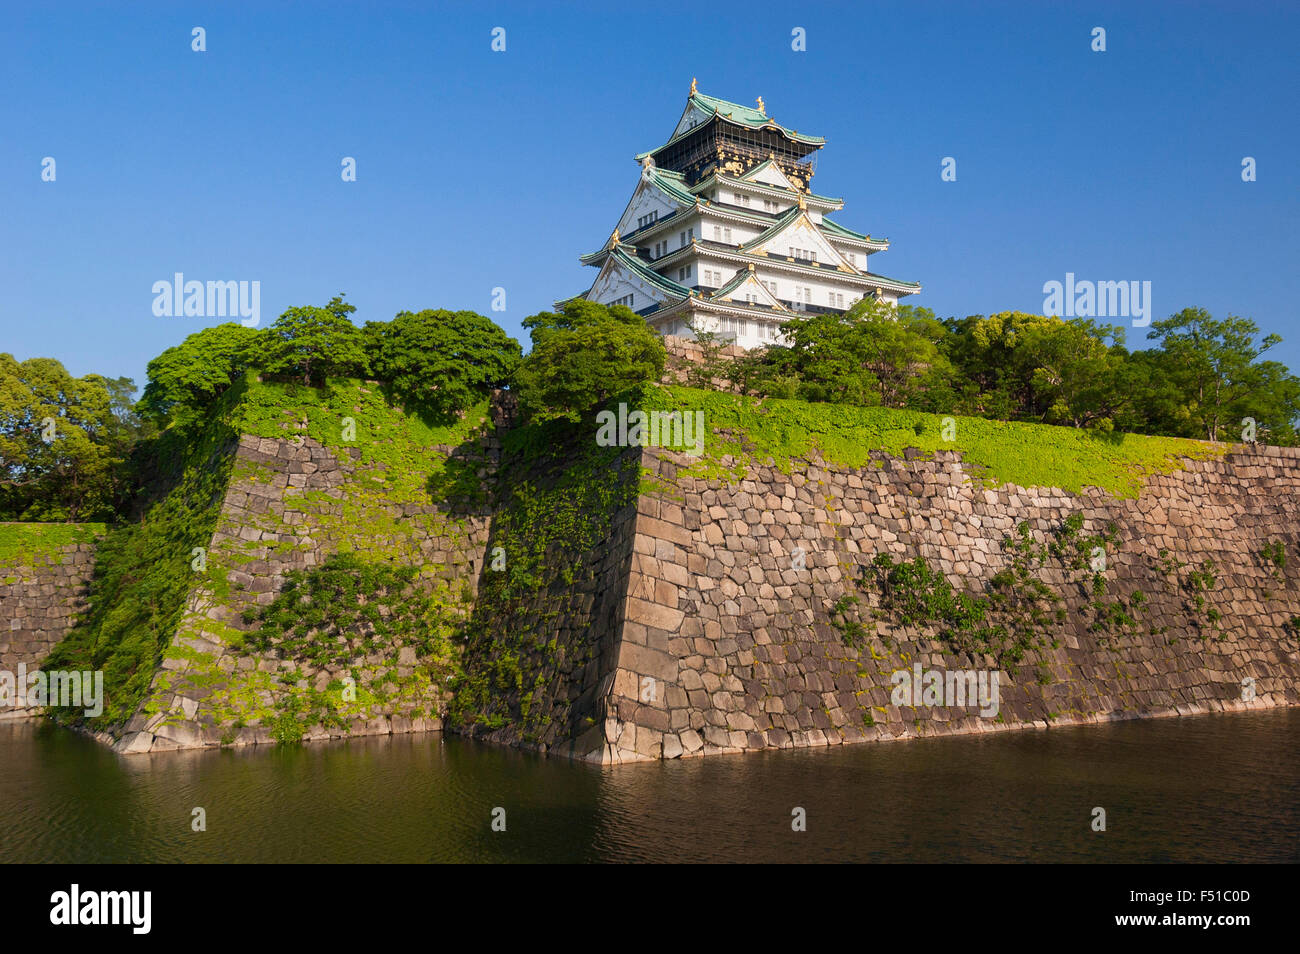 Exterior view of Osaka castle in Japan Stock Photo